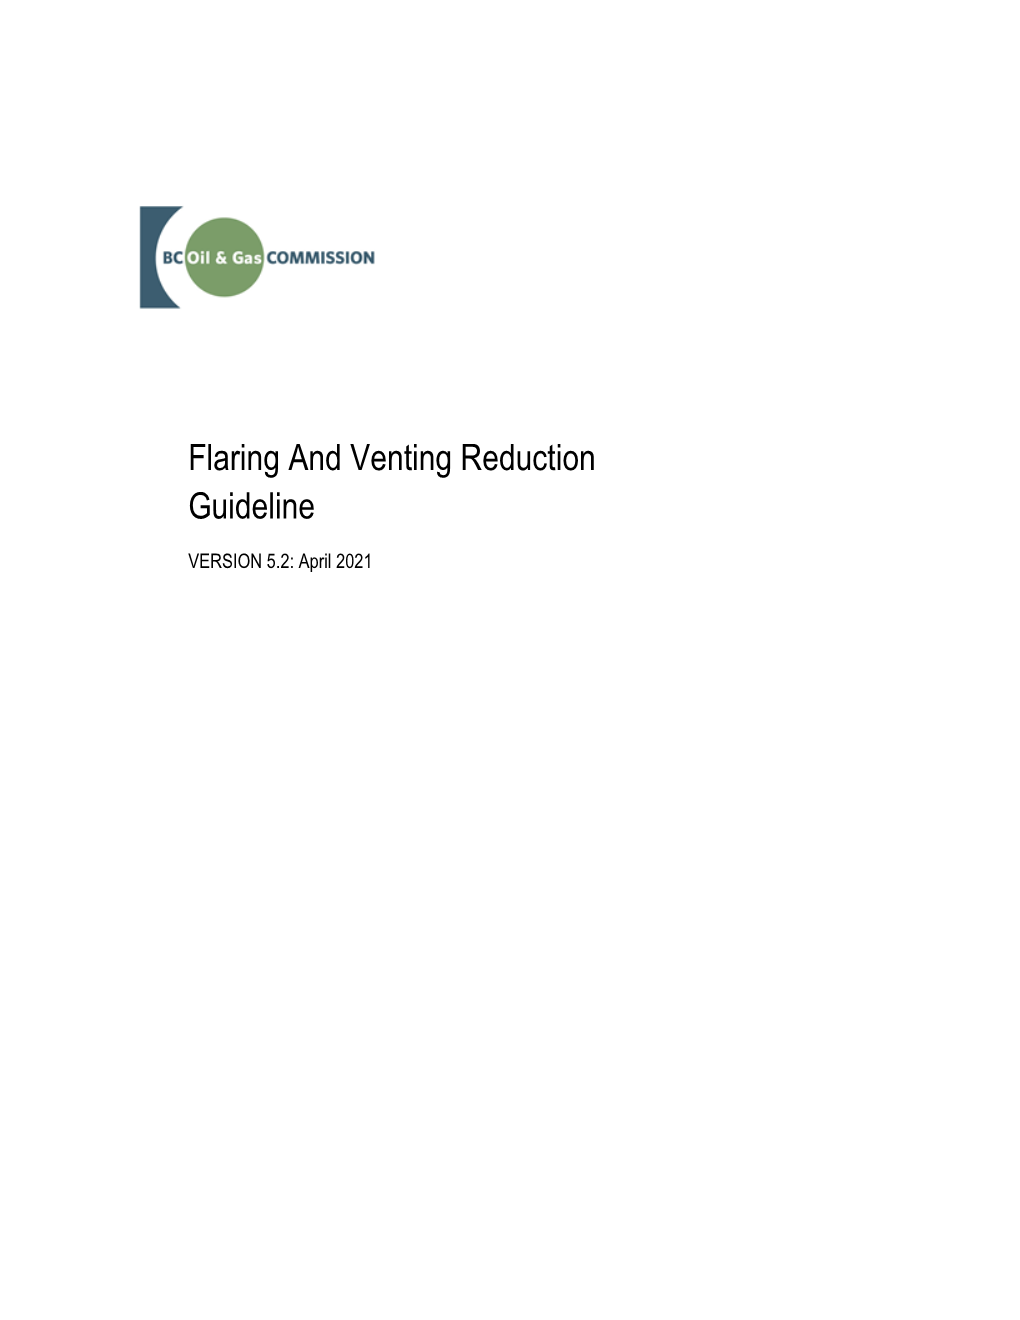 Flaring and Venting Reduction Guideline